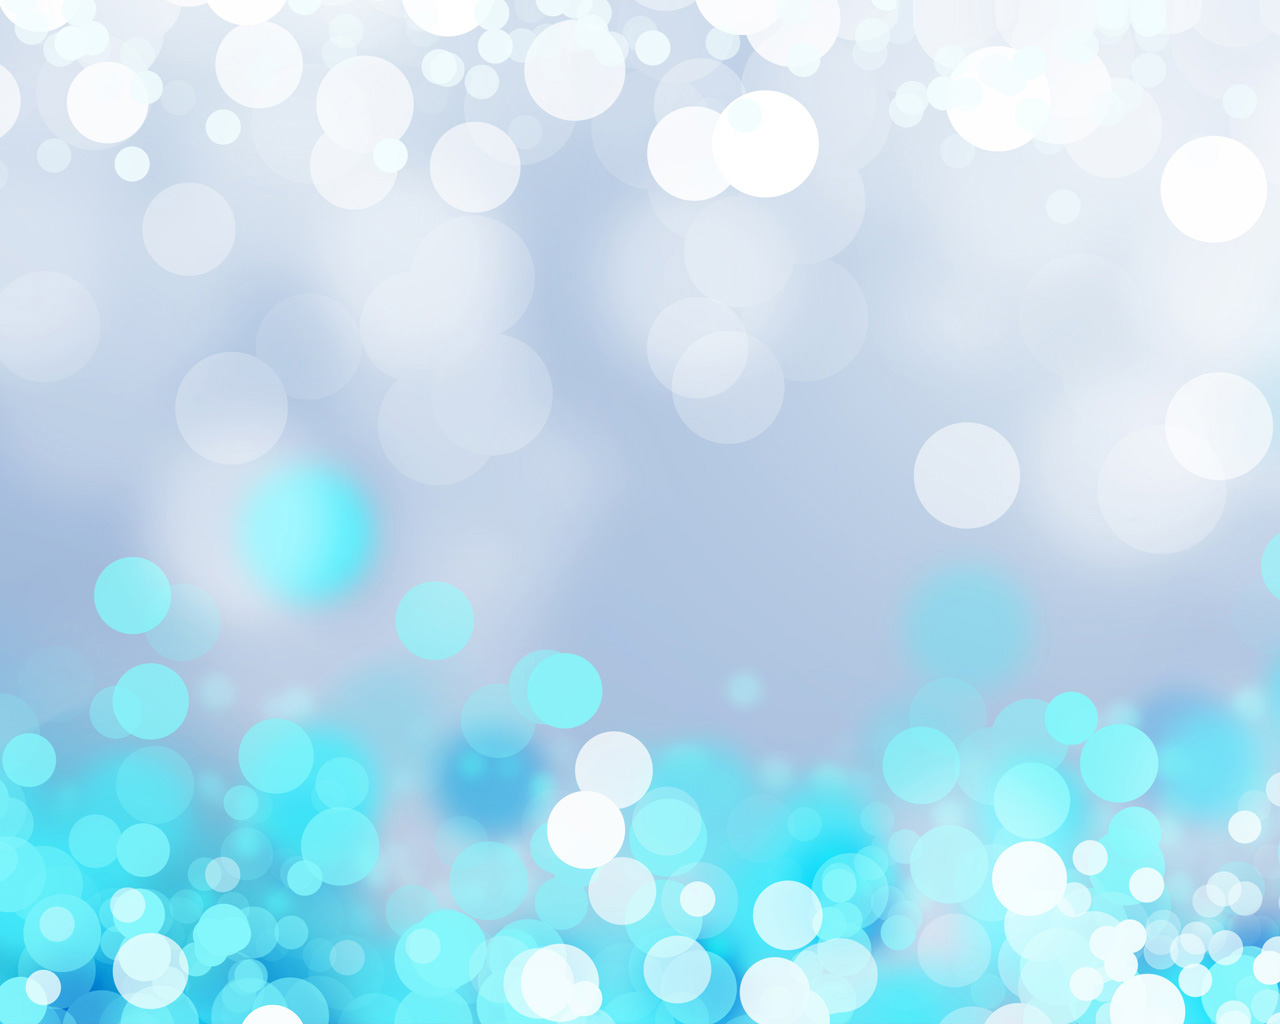 Blur Animated Lights PPT Backgrounds